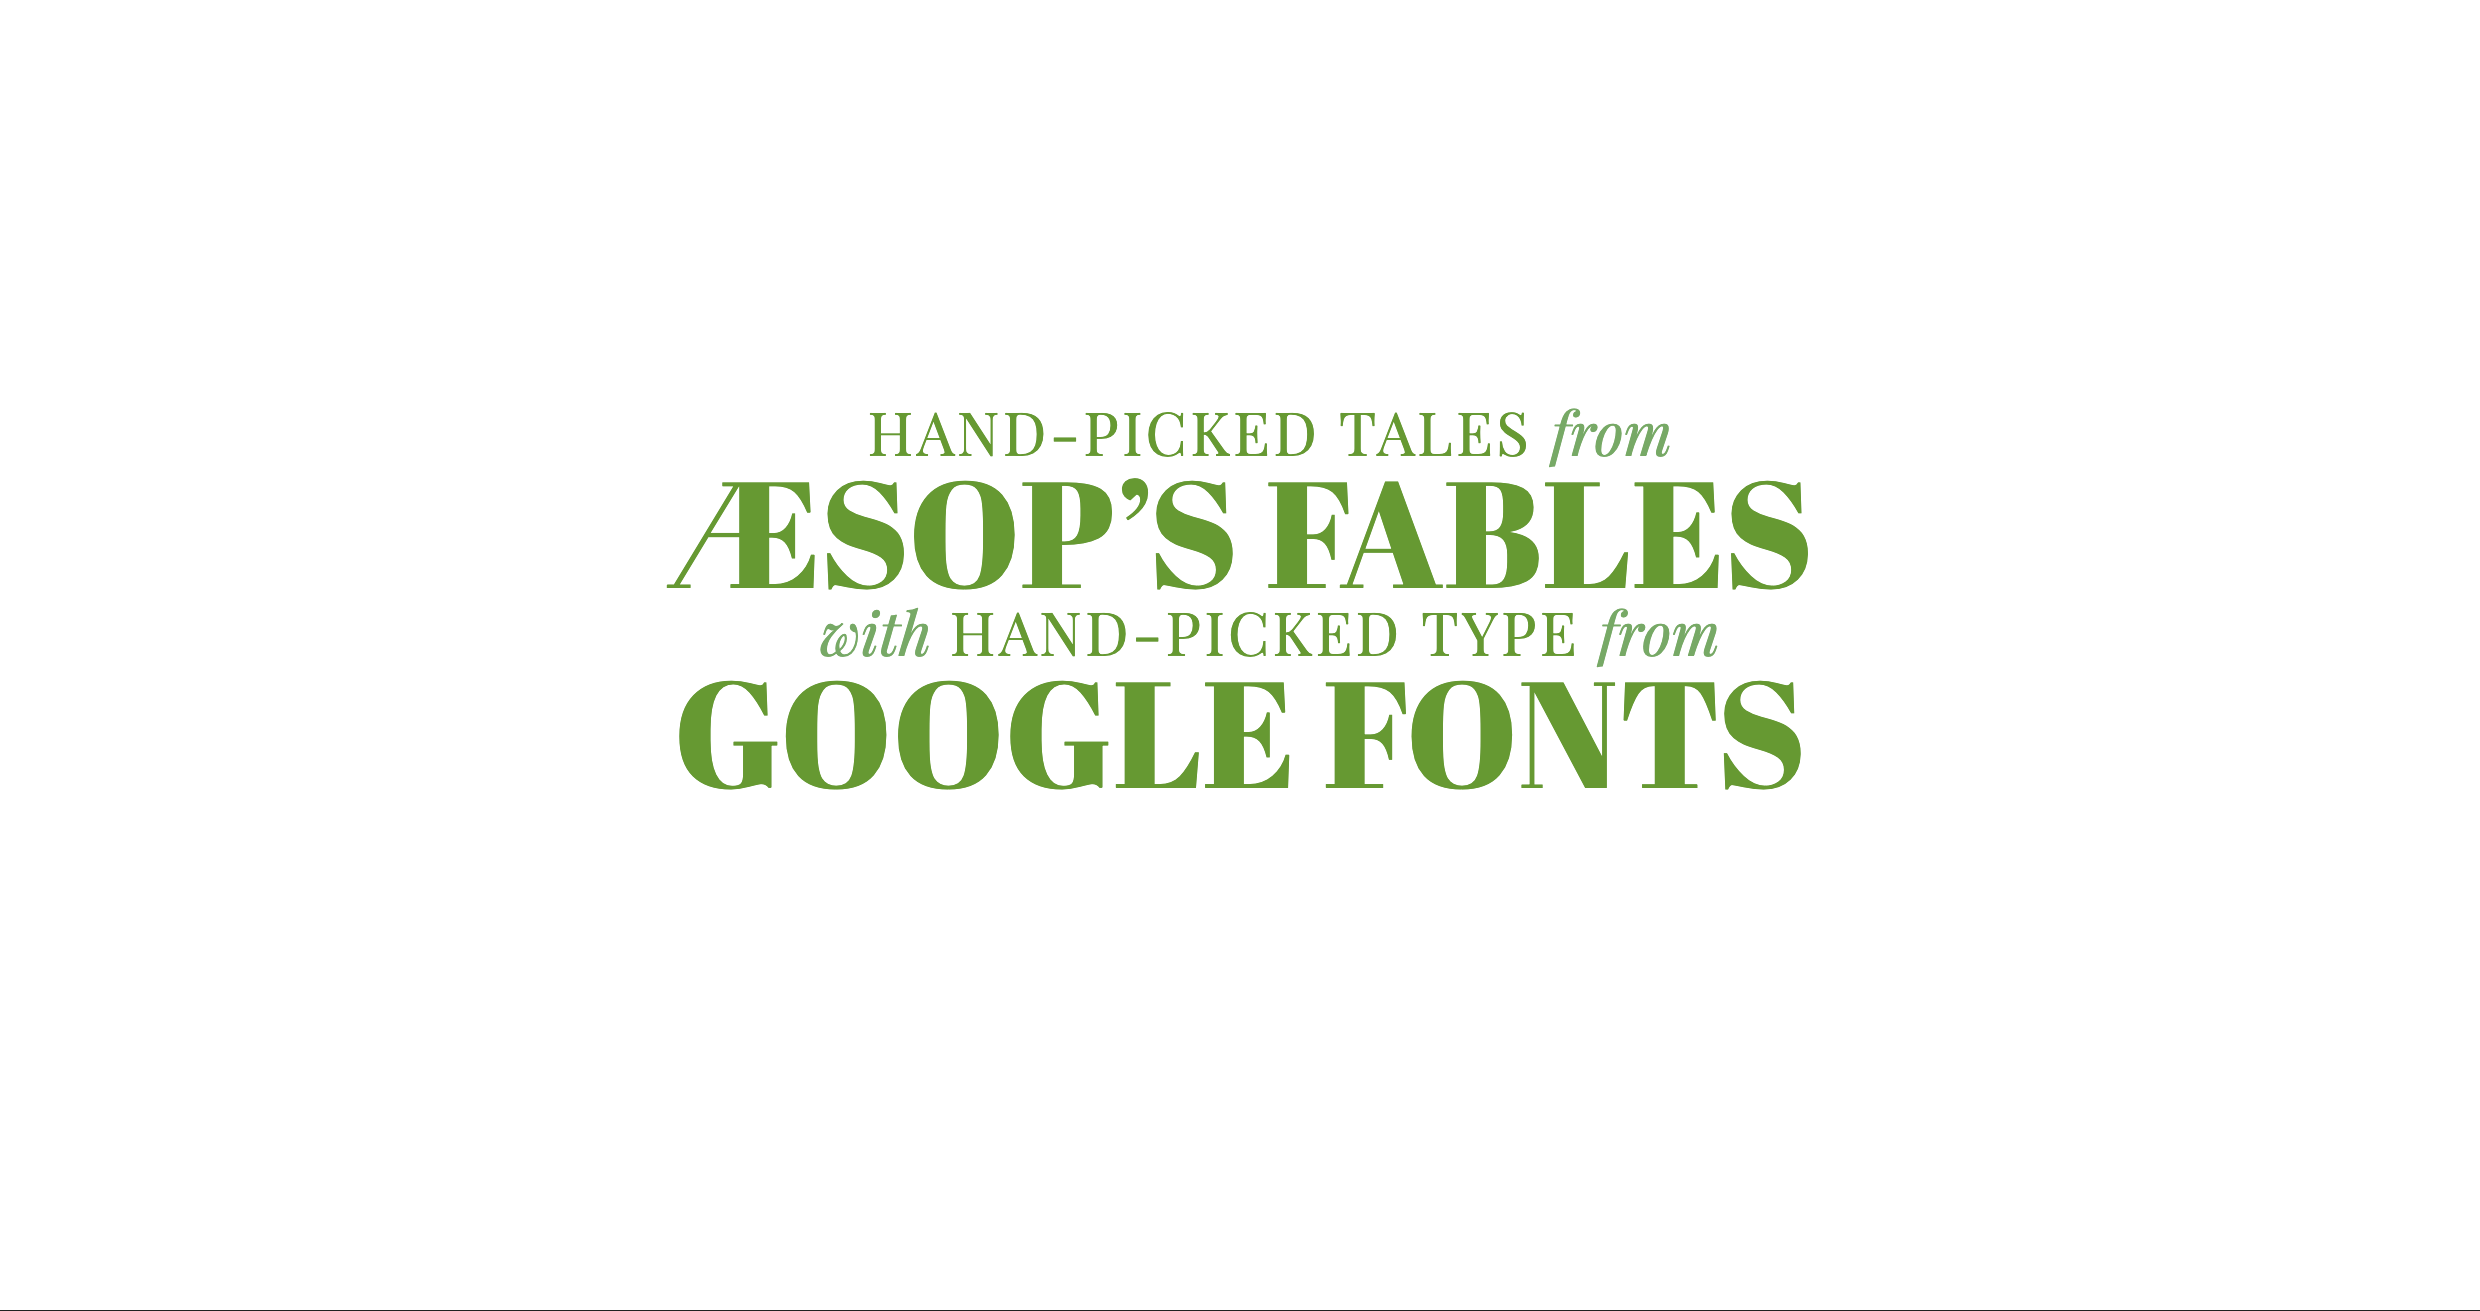 Hand-picked tales from Aesop's Fables with Hand-picked type from Google Fonts